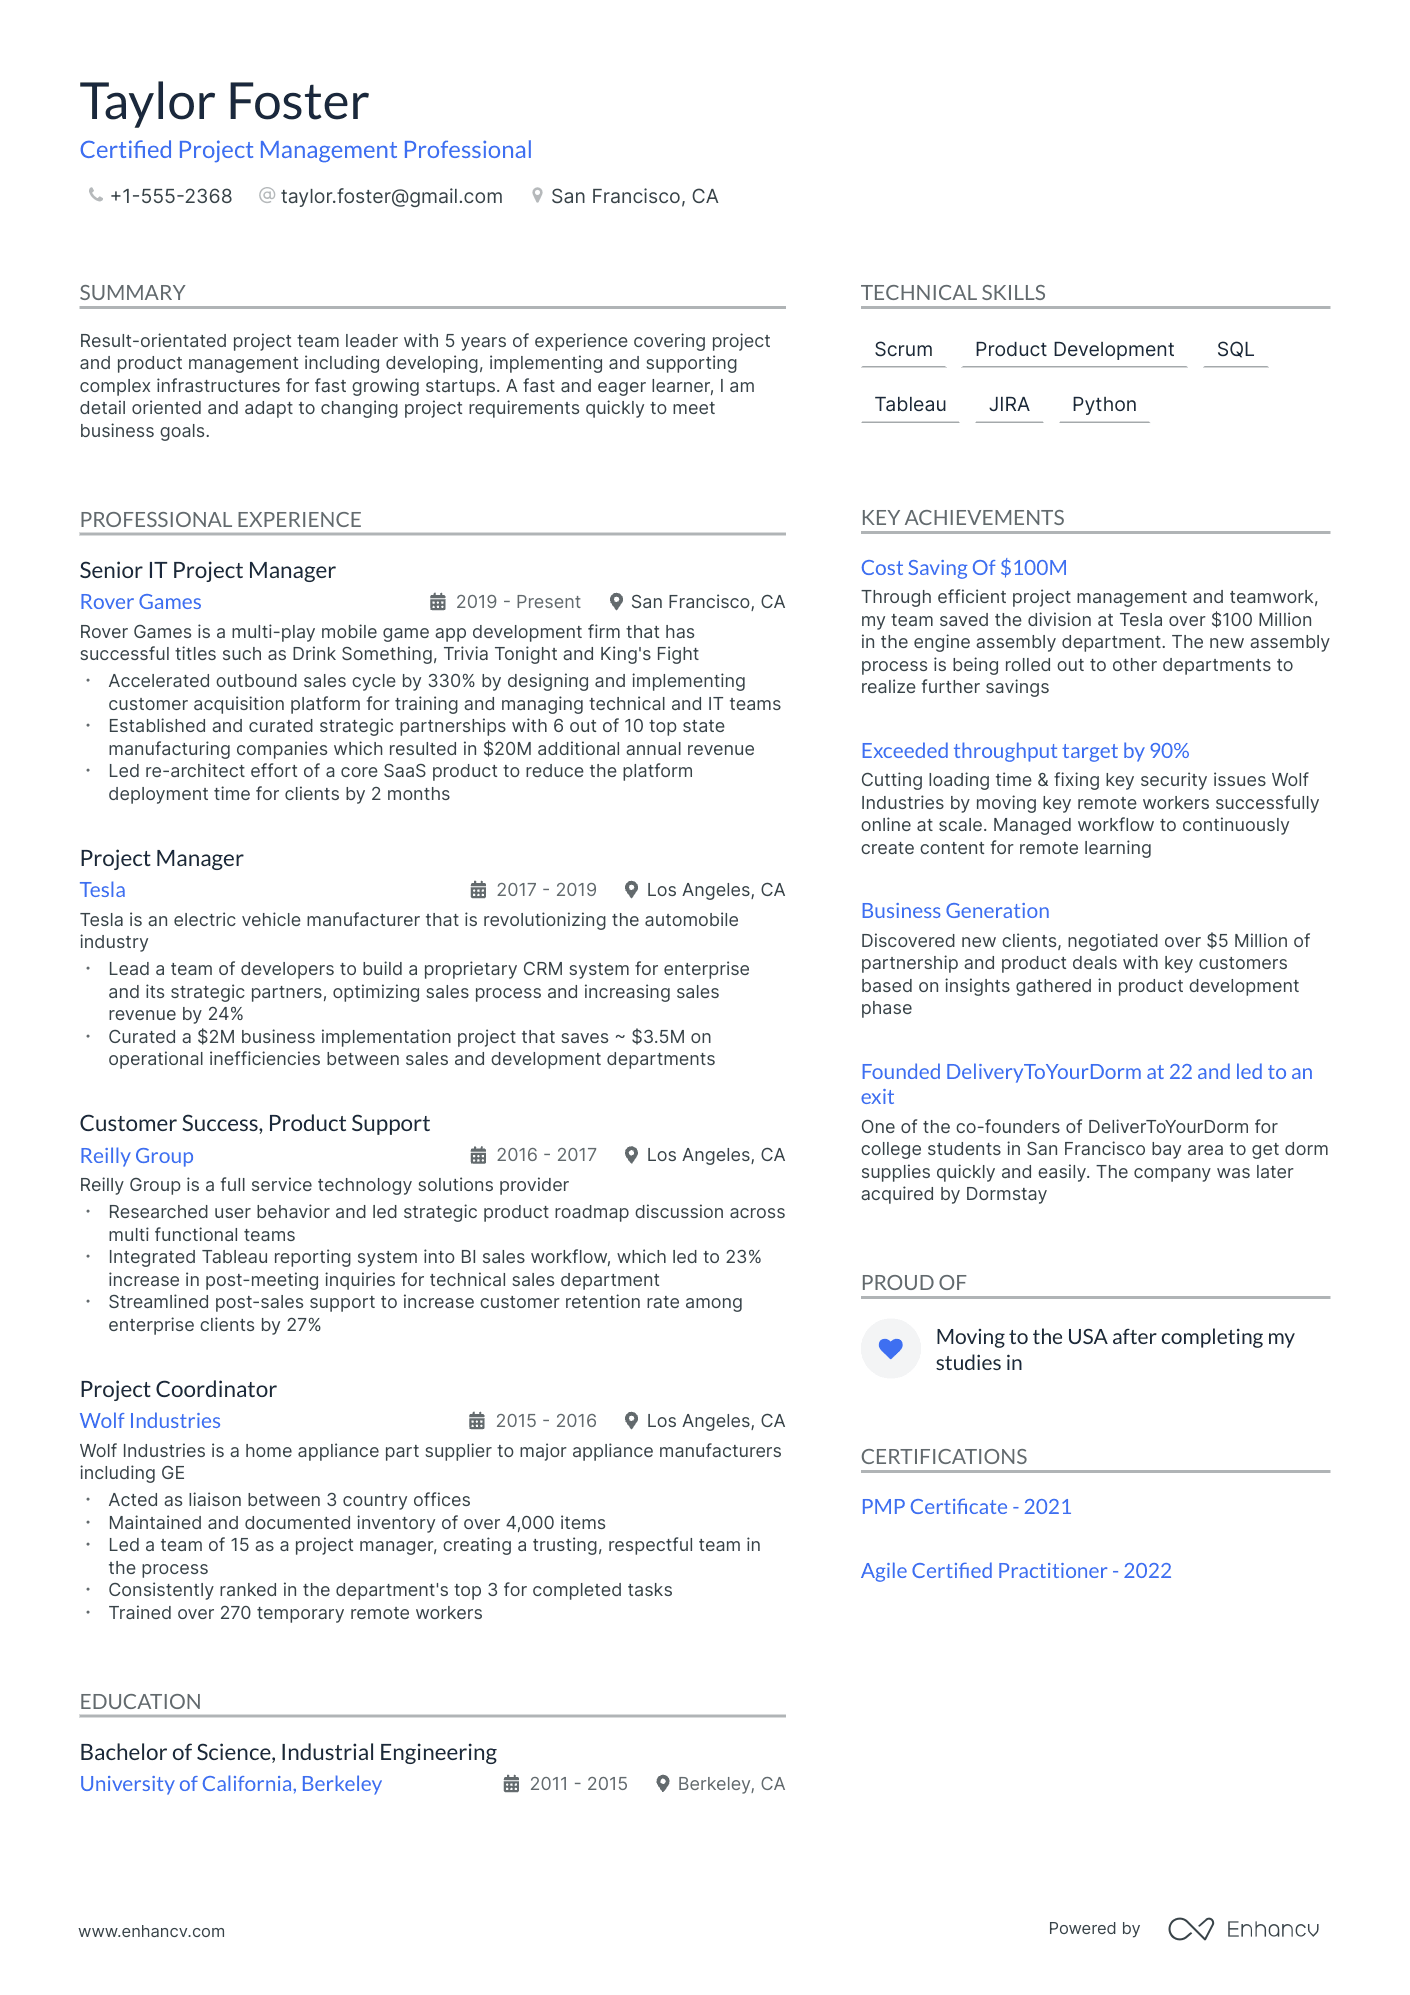 Project Manager resume